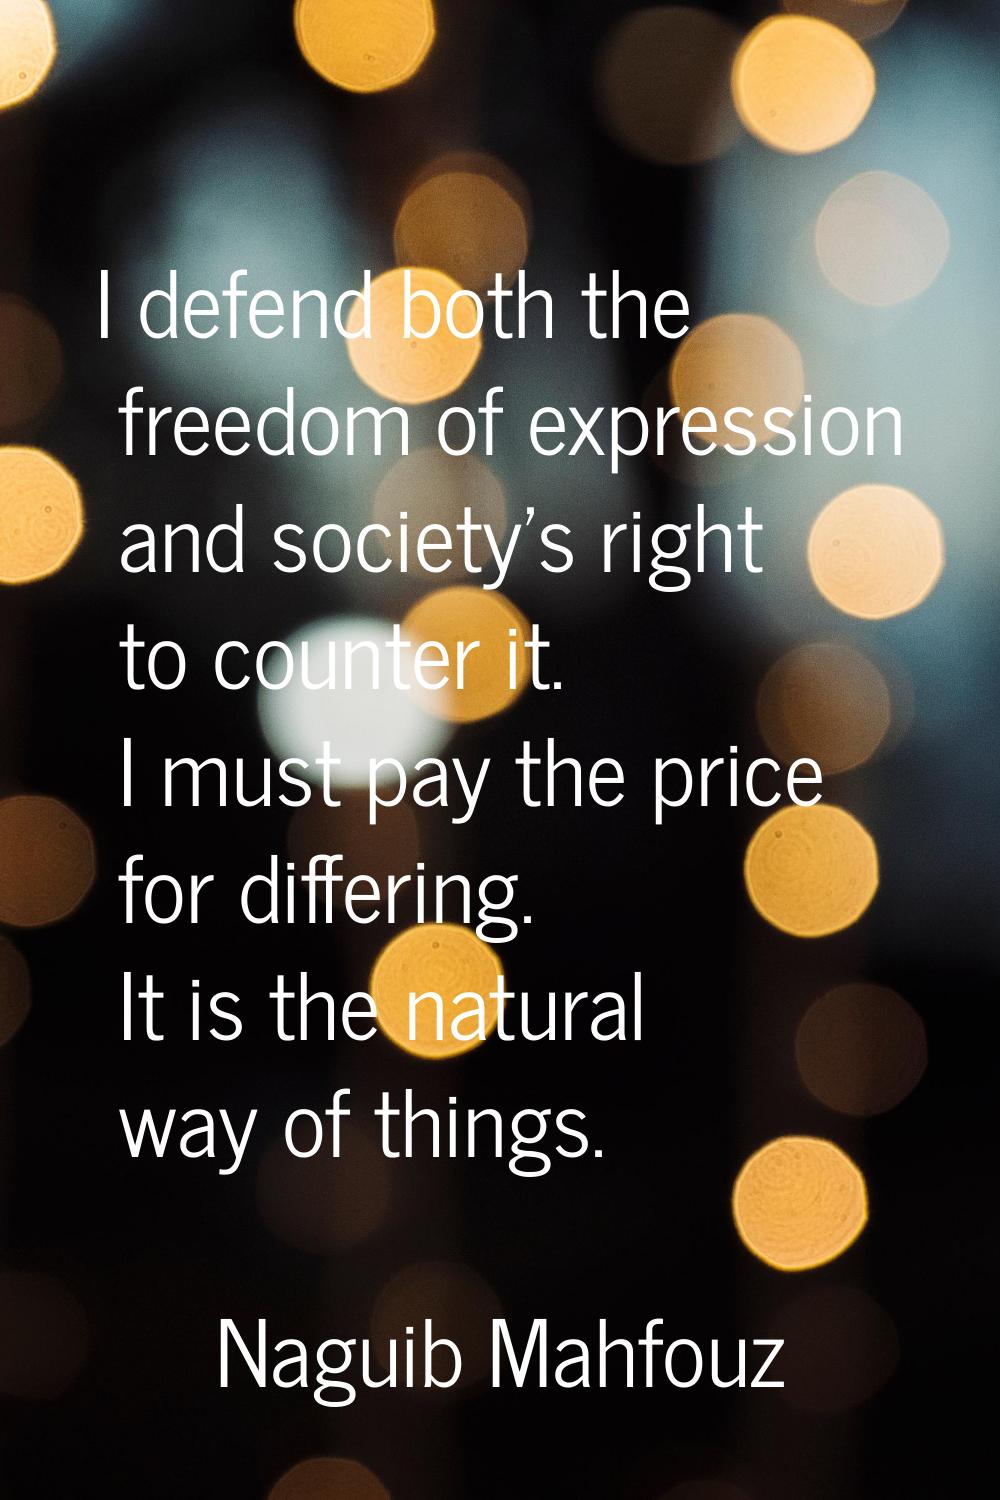 I defend both the freedom of expression and society's right to counter it. I must pay the price for